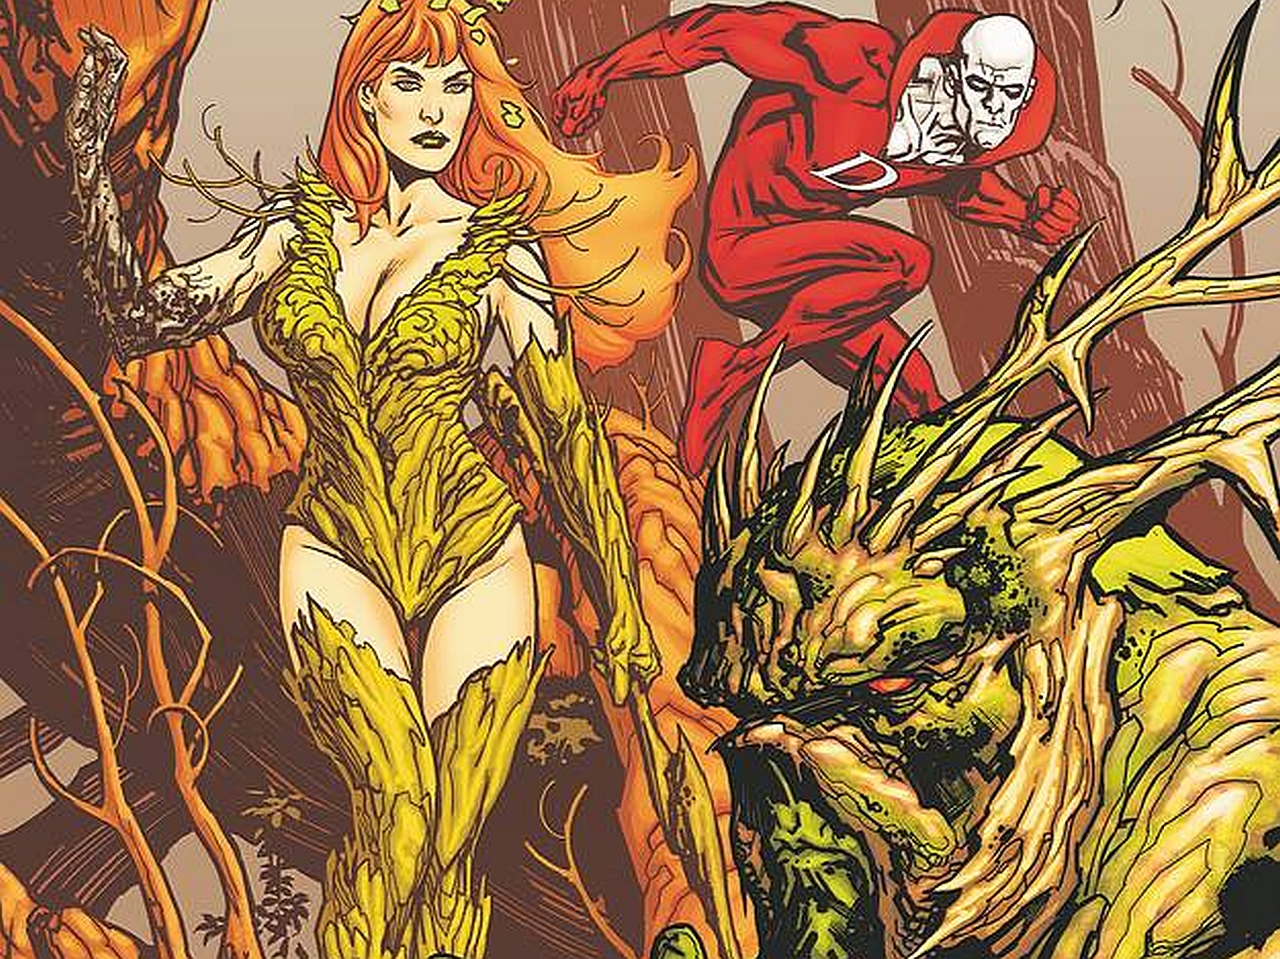 Swamp Thing Image - ID: 354612 - Image Abyss